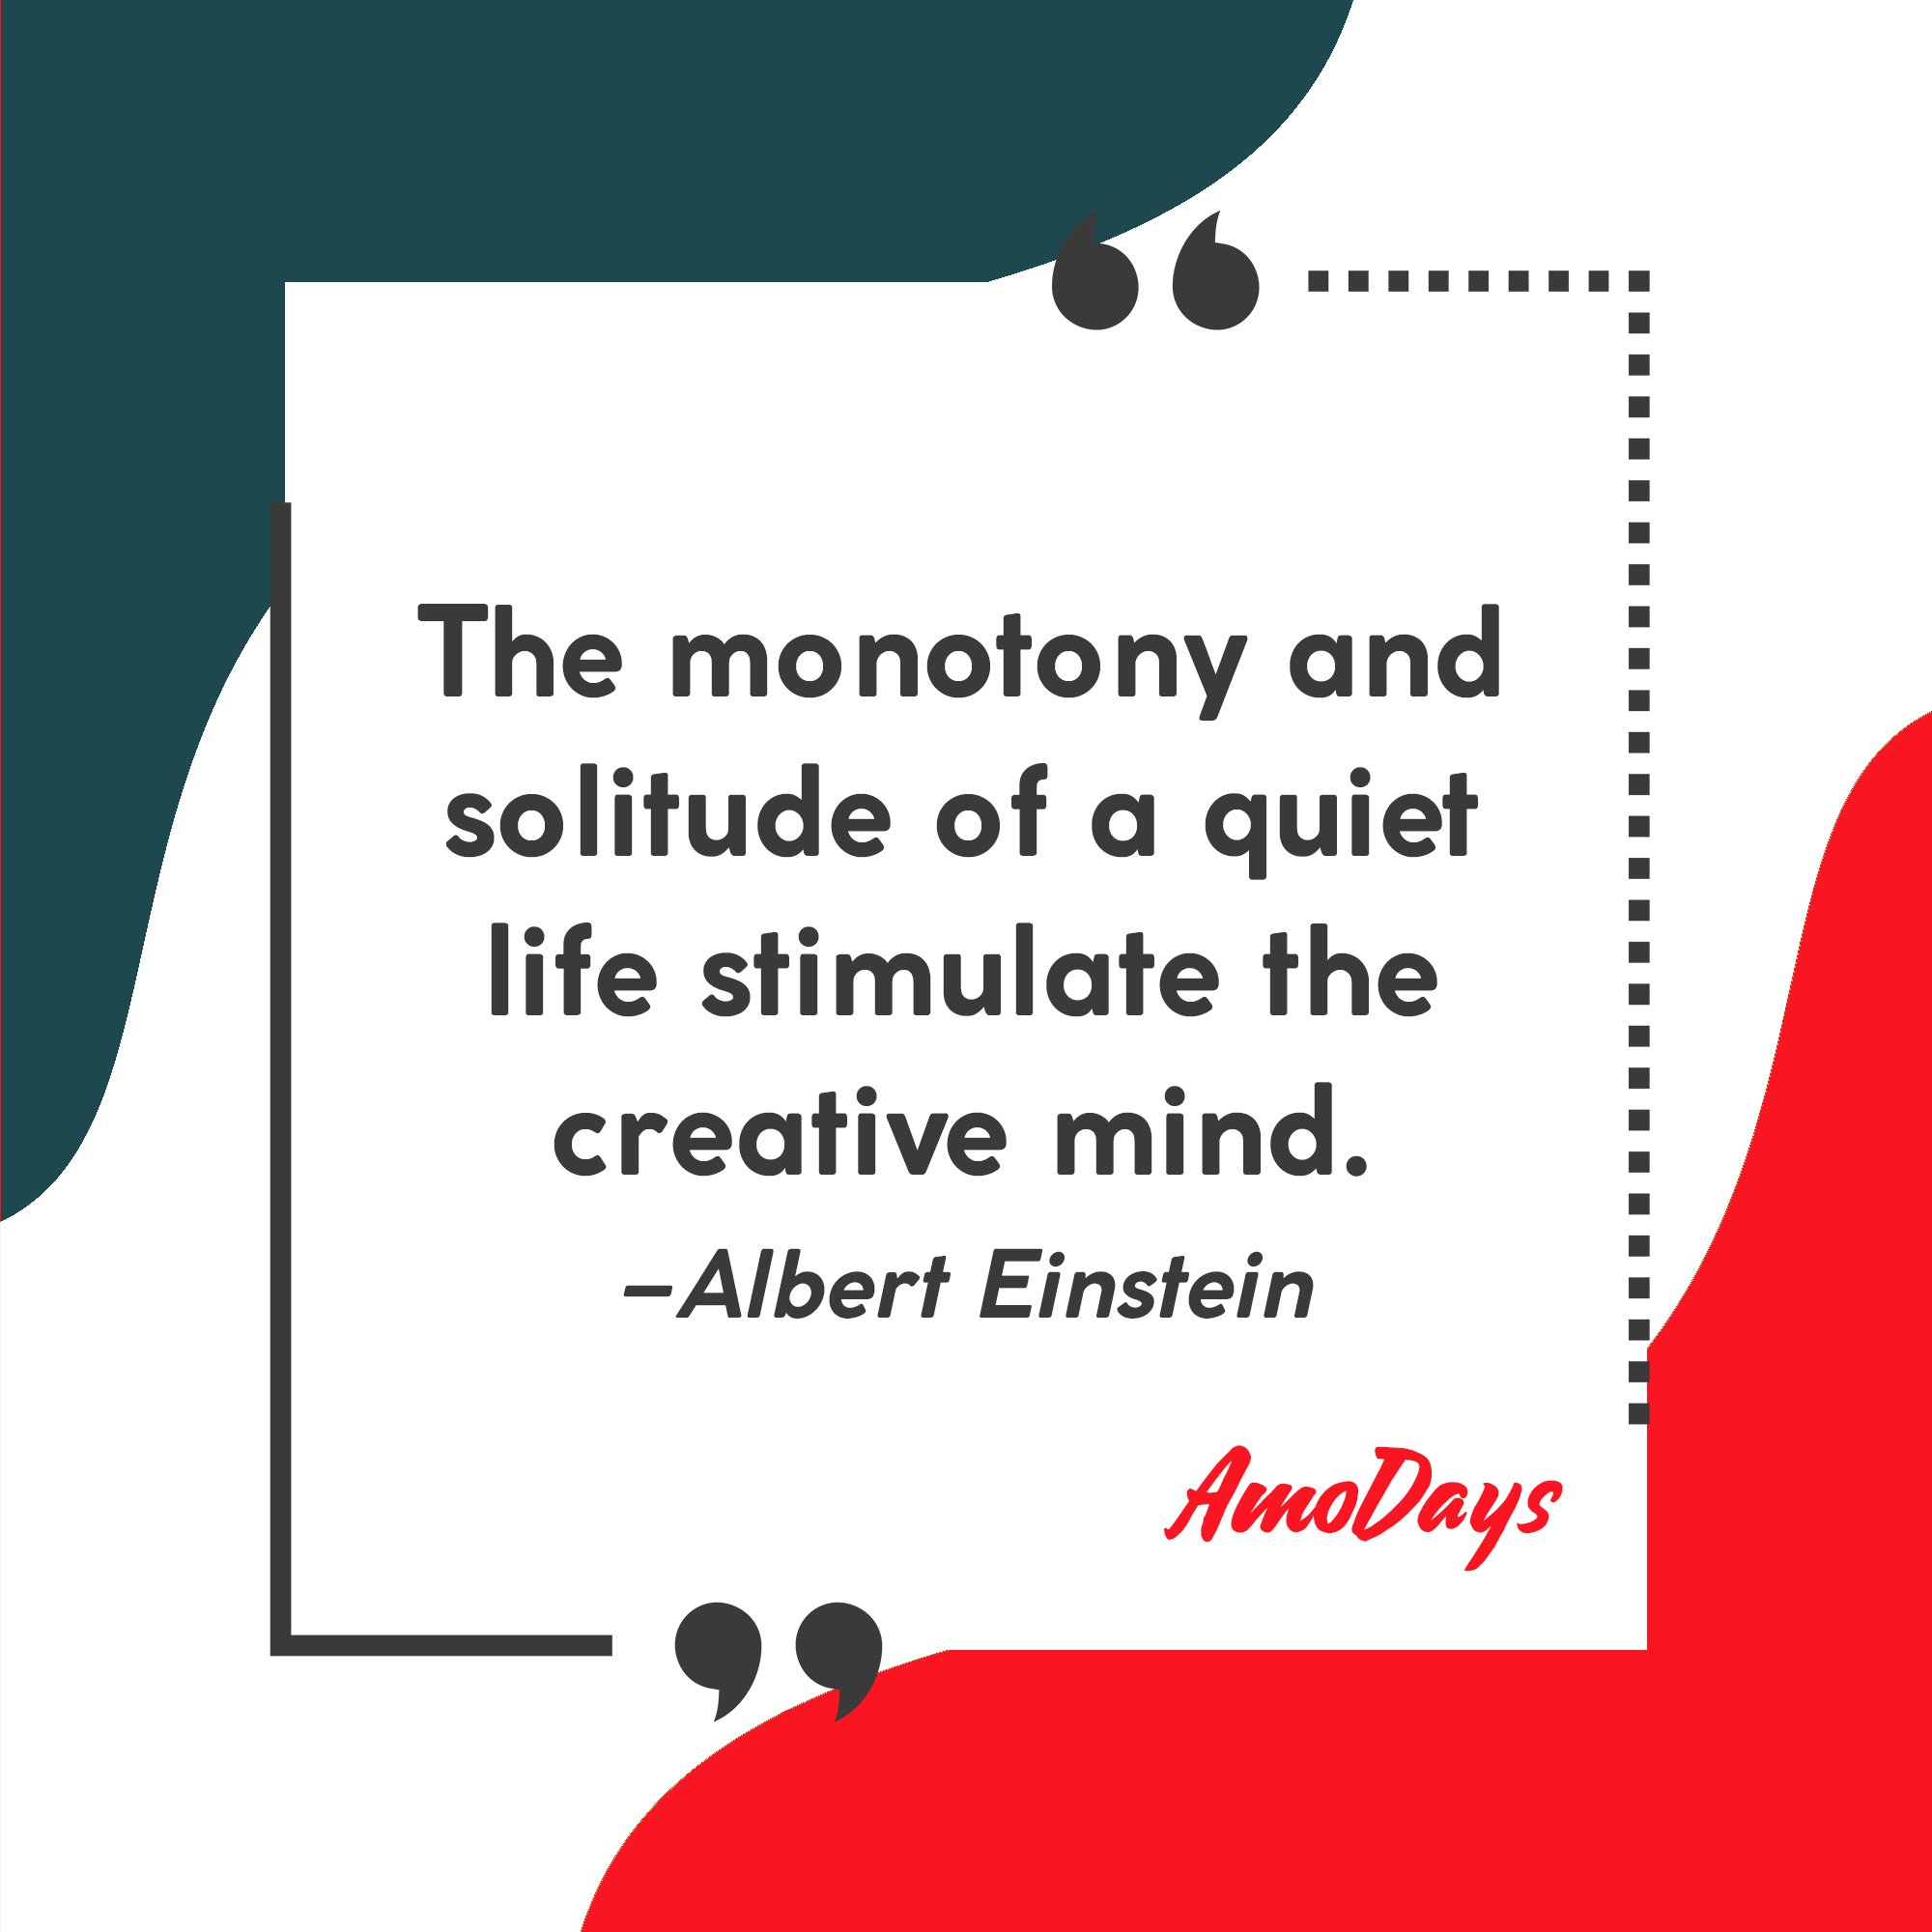 Albert Einstein's quote "The monotony and solitude of a quiet life stimulate the creative mind." | Image: AmoDays